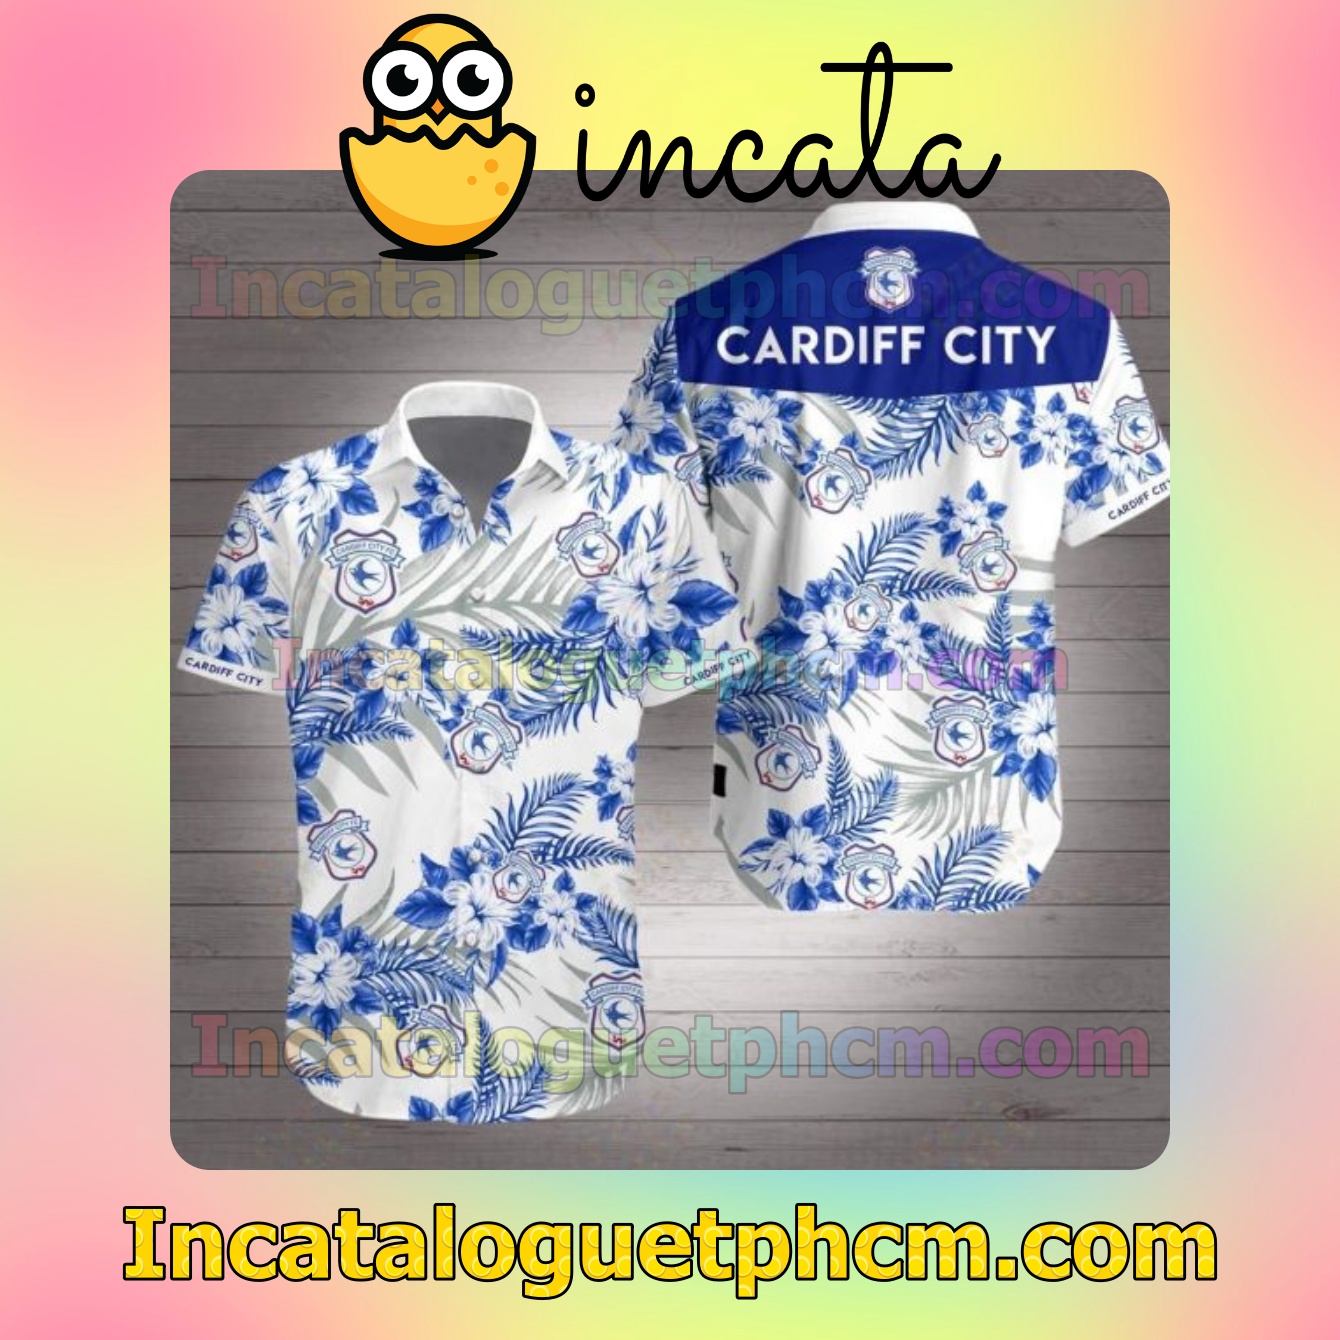 Cardiff City Blue Tropical Floral White Mens Short Sleeve Shirts